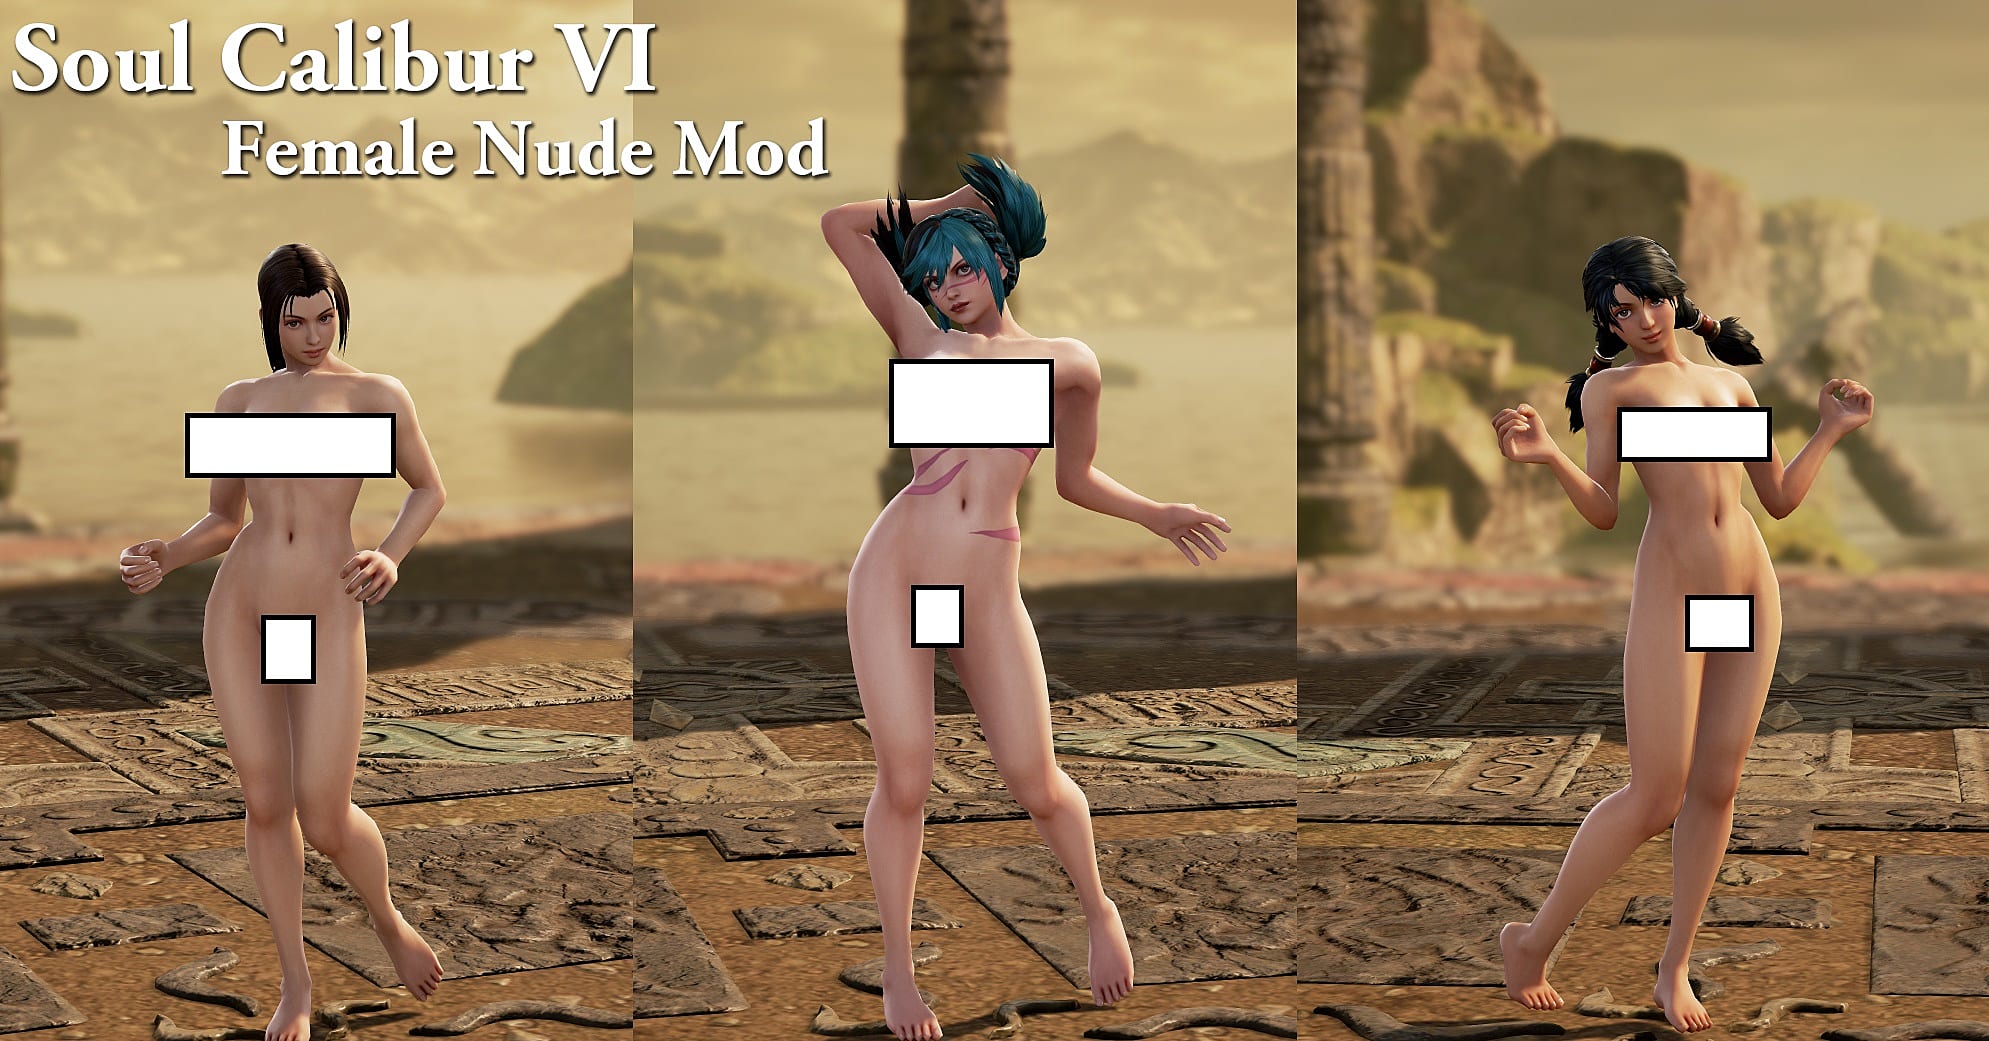 11 More NSFW Nude Mods From Your Favorite Games | Slide 5